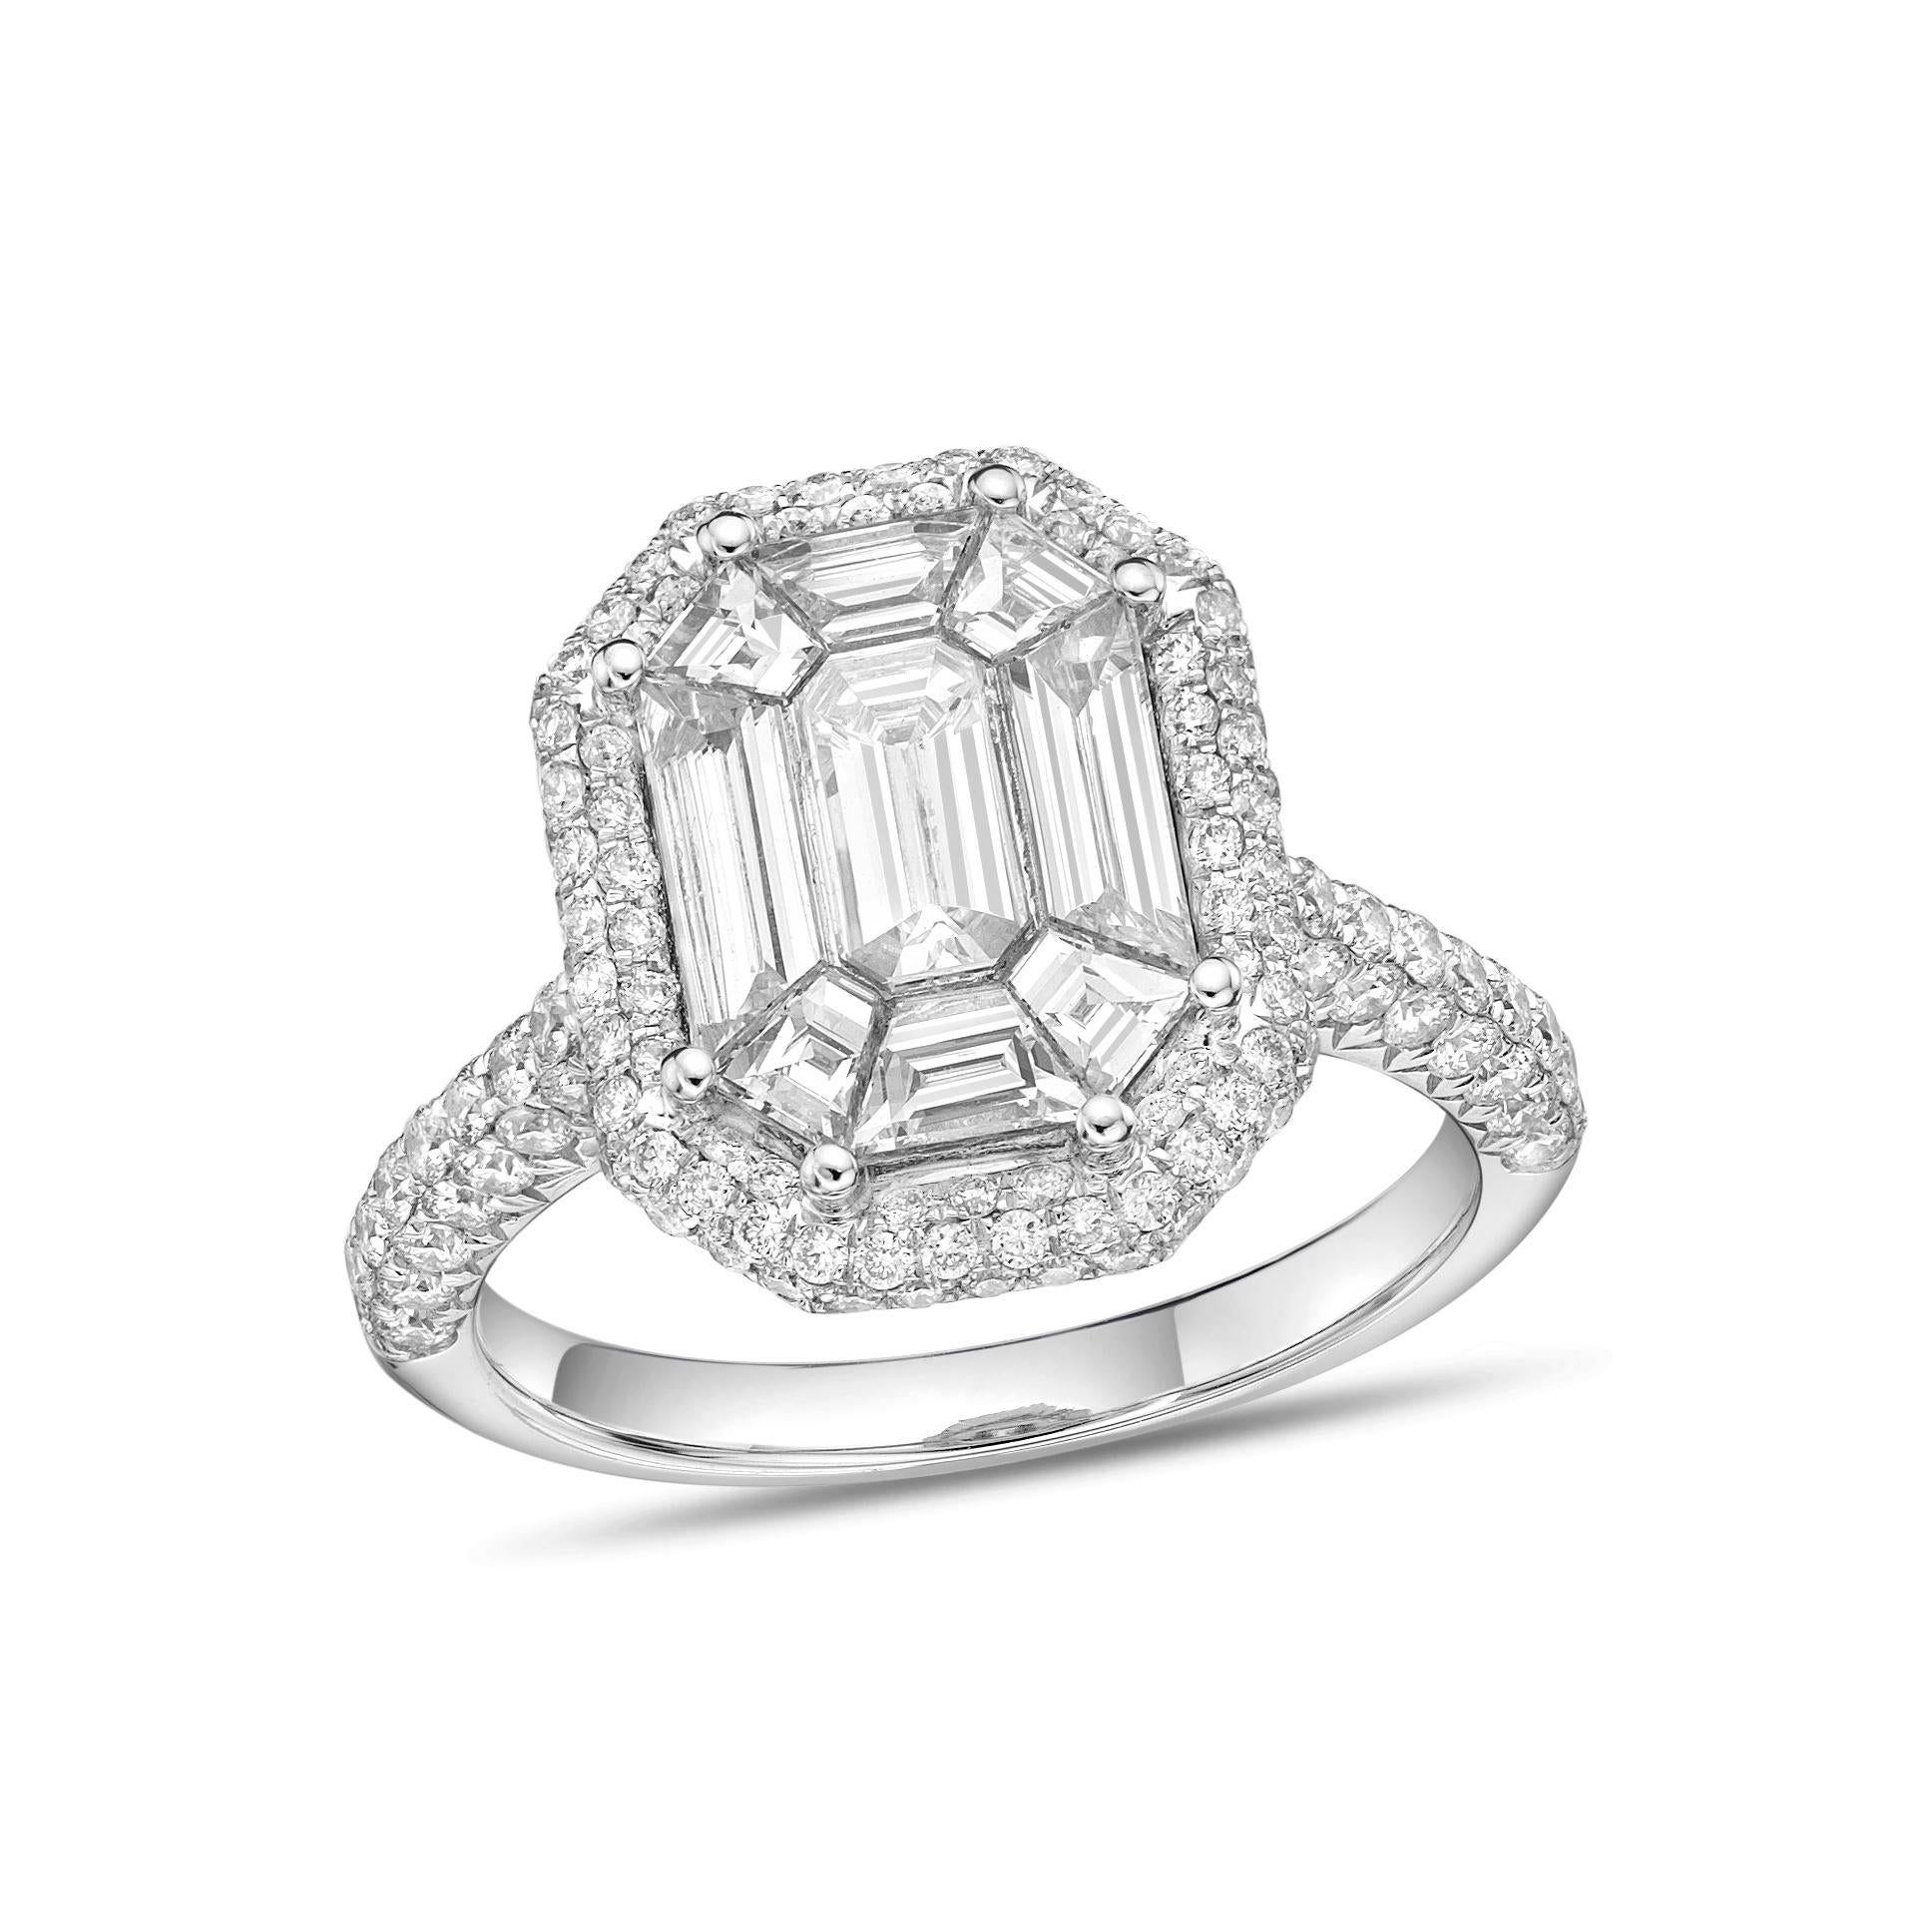 Diamonds are symbols of purity, unity, and love. They absorb and amplify energy, both positive and negative. They are also connected to the energy of wealth and are helpful in attracting abundance and manifesting.

The ring setting with 194 piece